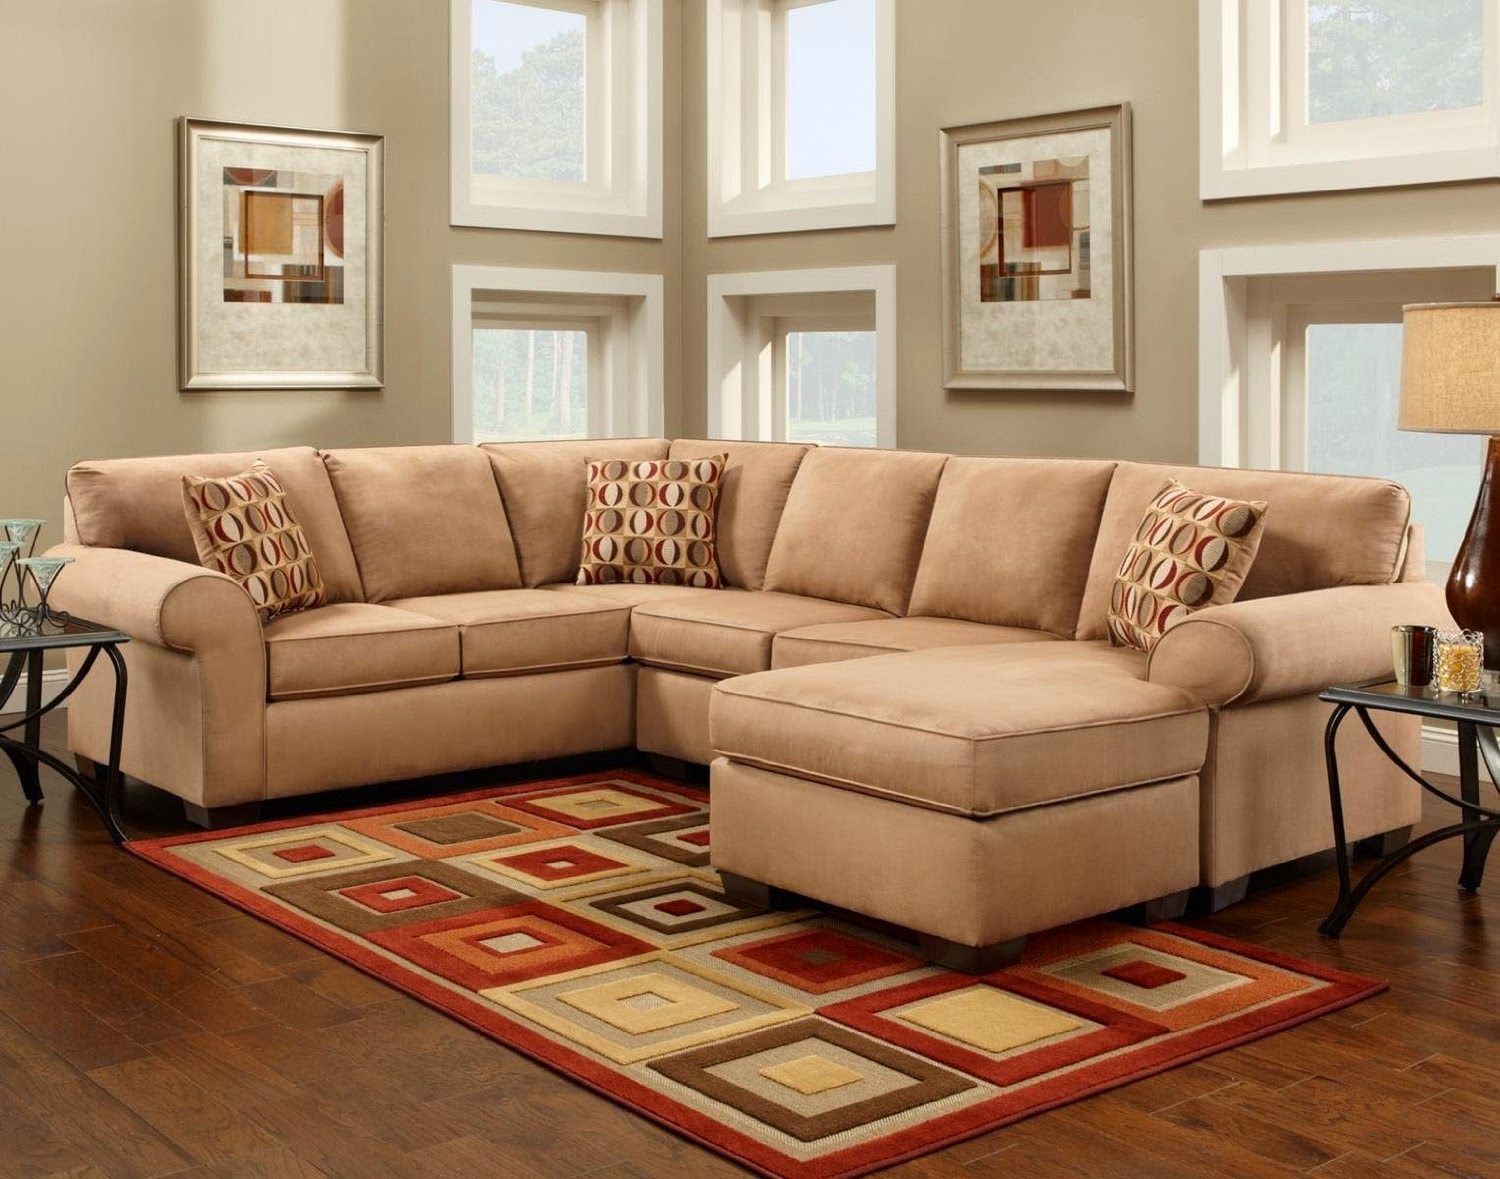 3 Popular Main Colors In Microfiber Sectional Sleeper Sofa With Microfiber Sectional Corner Sofas (Gallery 12 of 20)